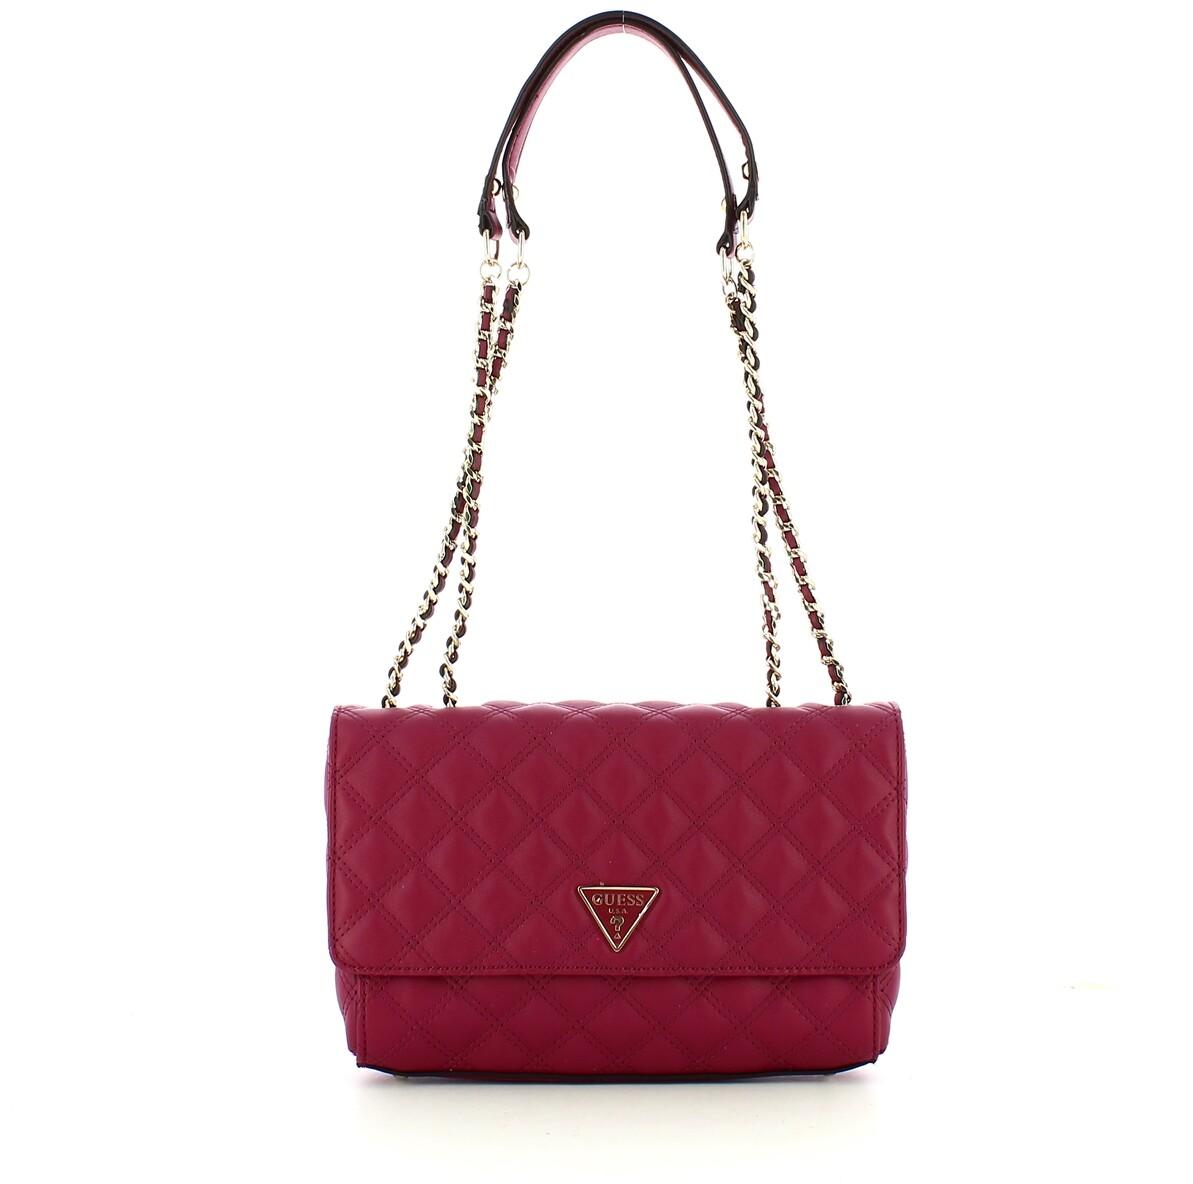 Guess Red Quilted Shoulder Bag at FORZIERI